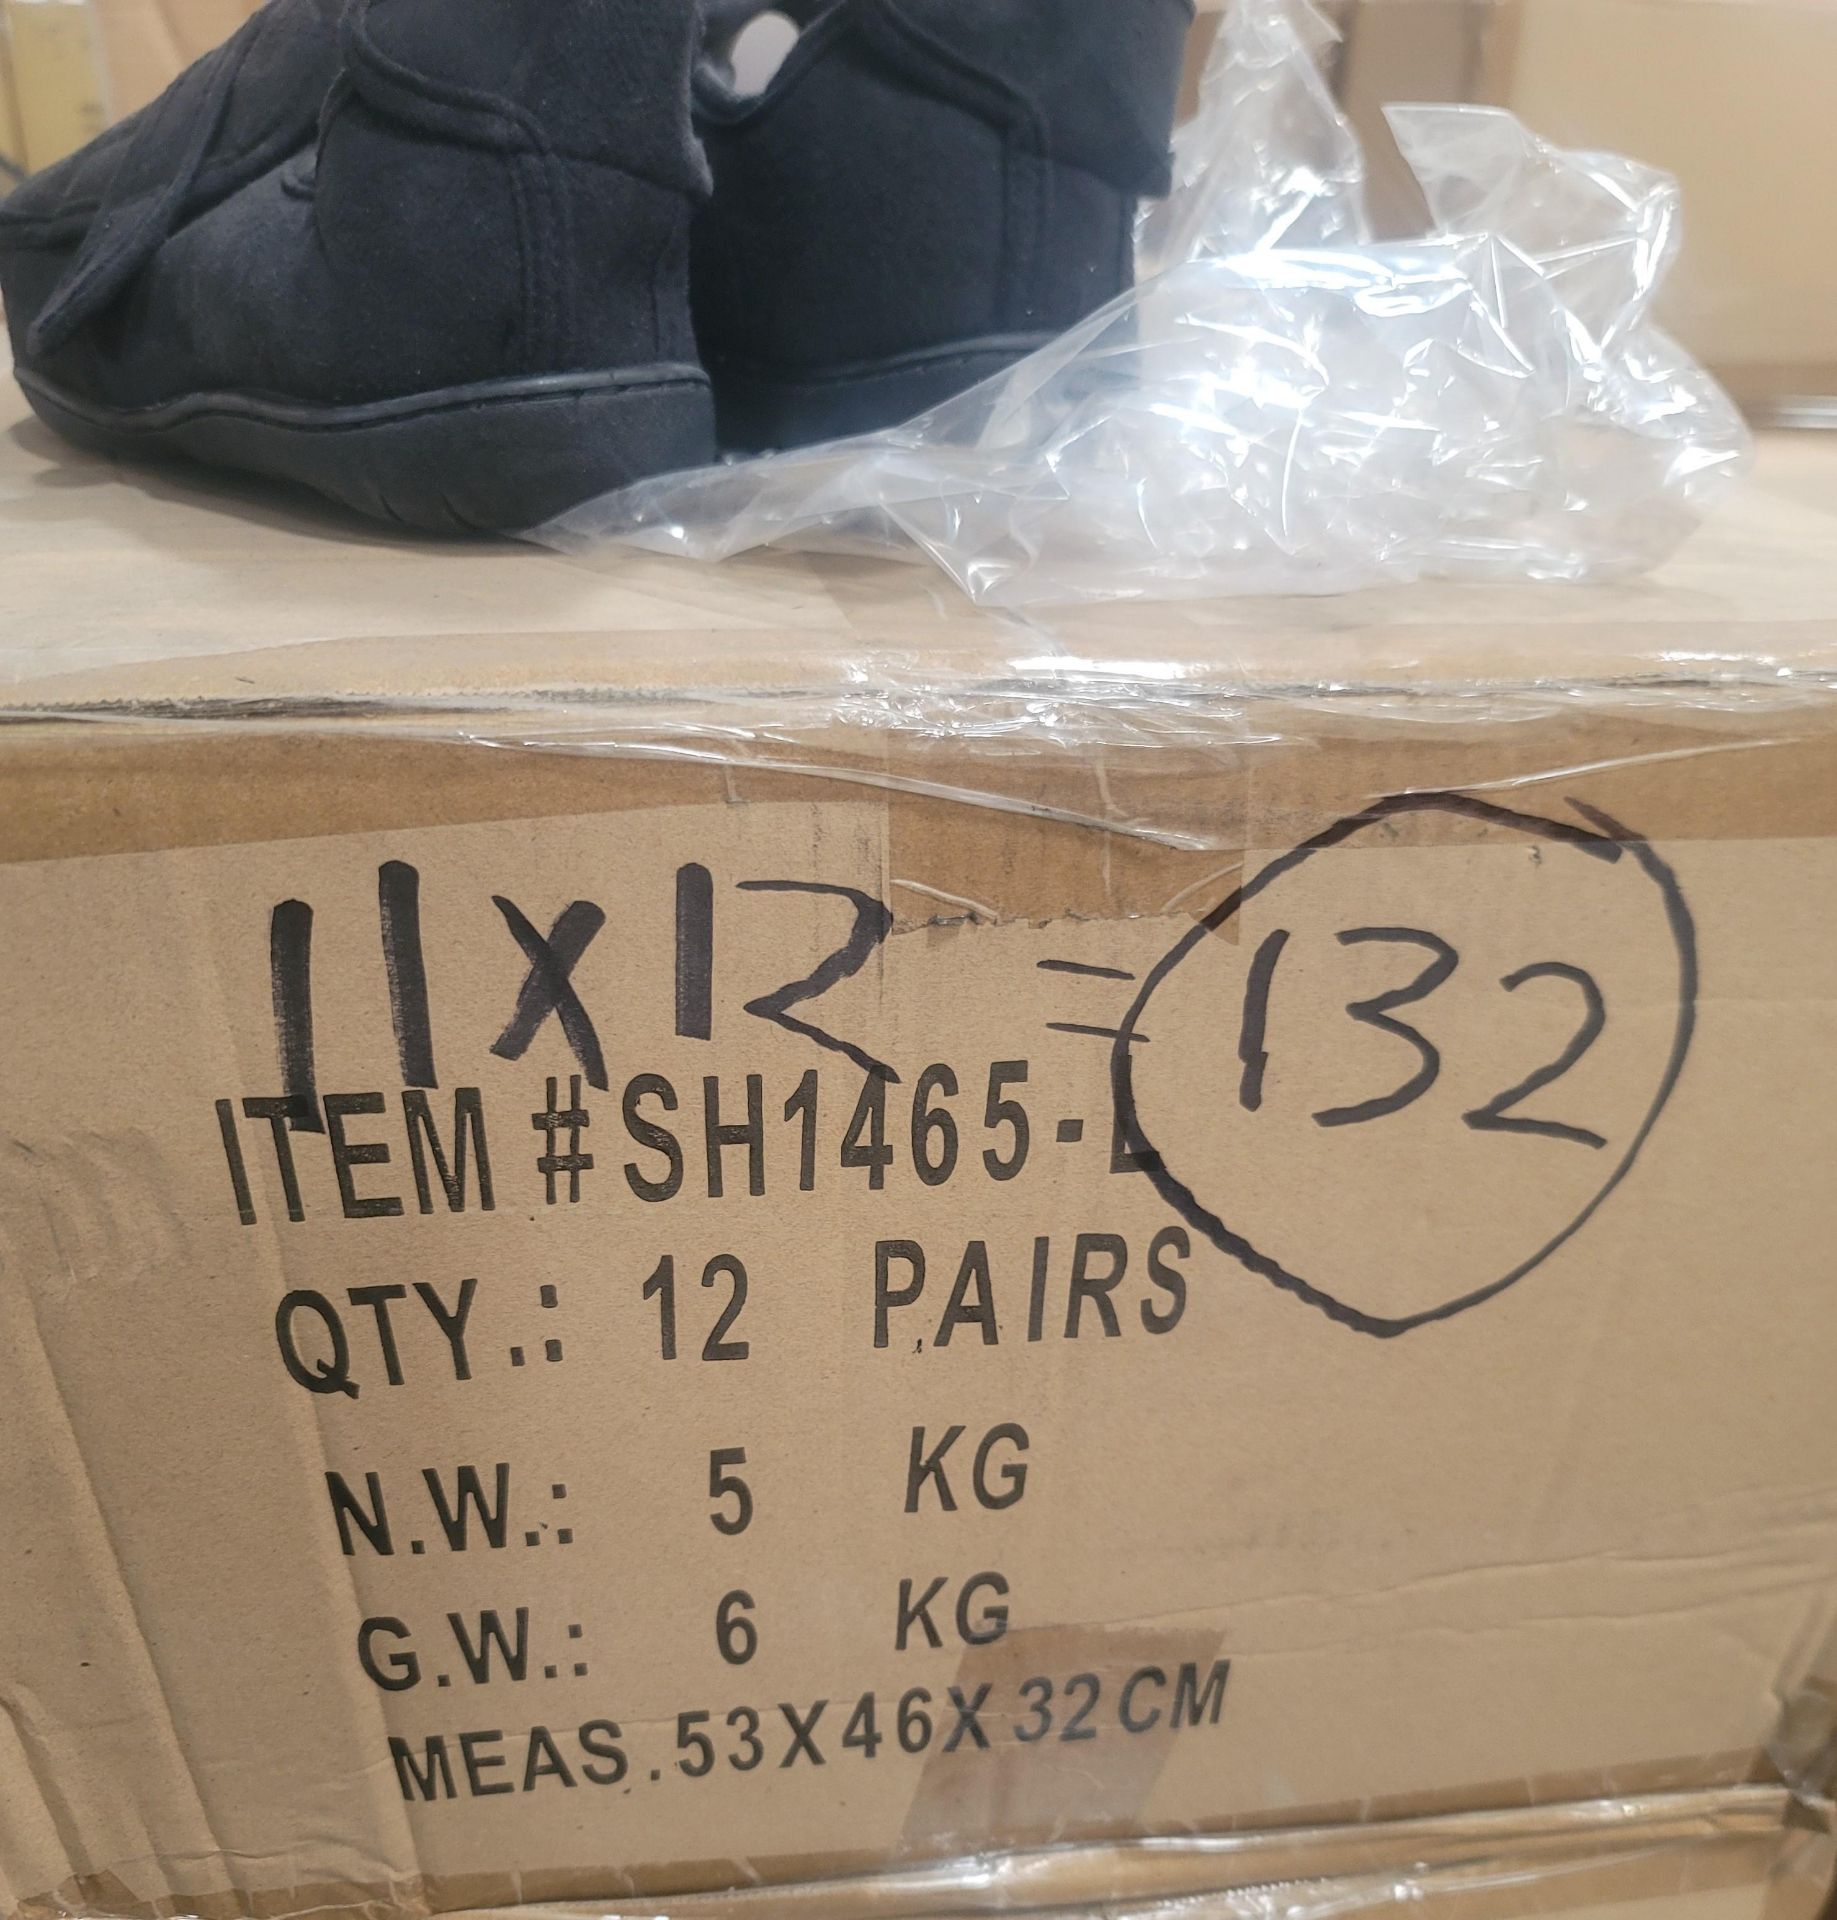 LOT - PALLET OF (132) PAIRS OF LARGE SLIPPERS W/ VELCRO ADJUSTMENT ON INSTEP AND HEEL, (11 CASES/ - Image 2 of 3